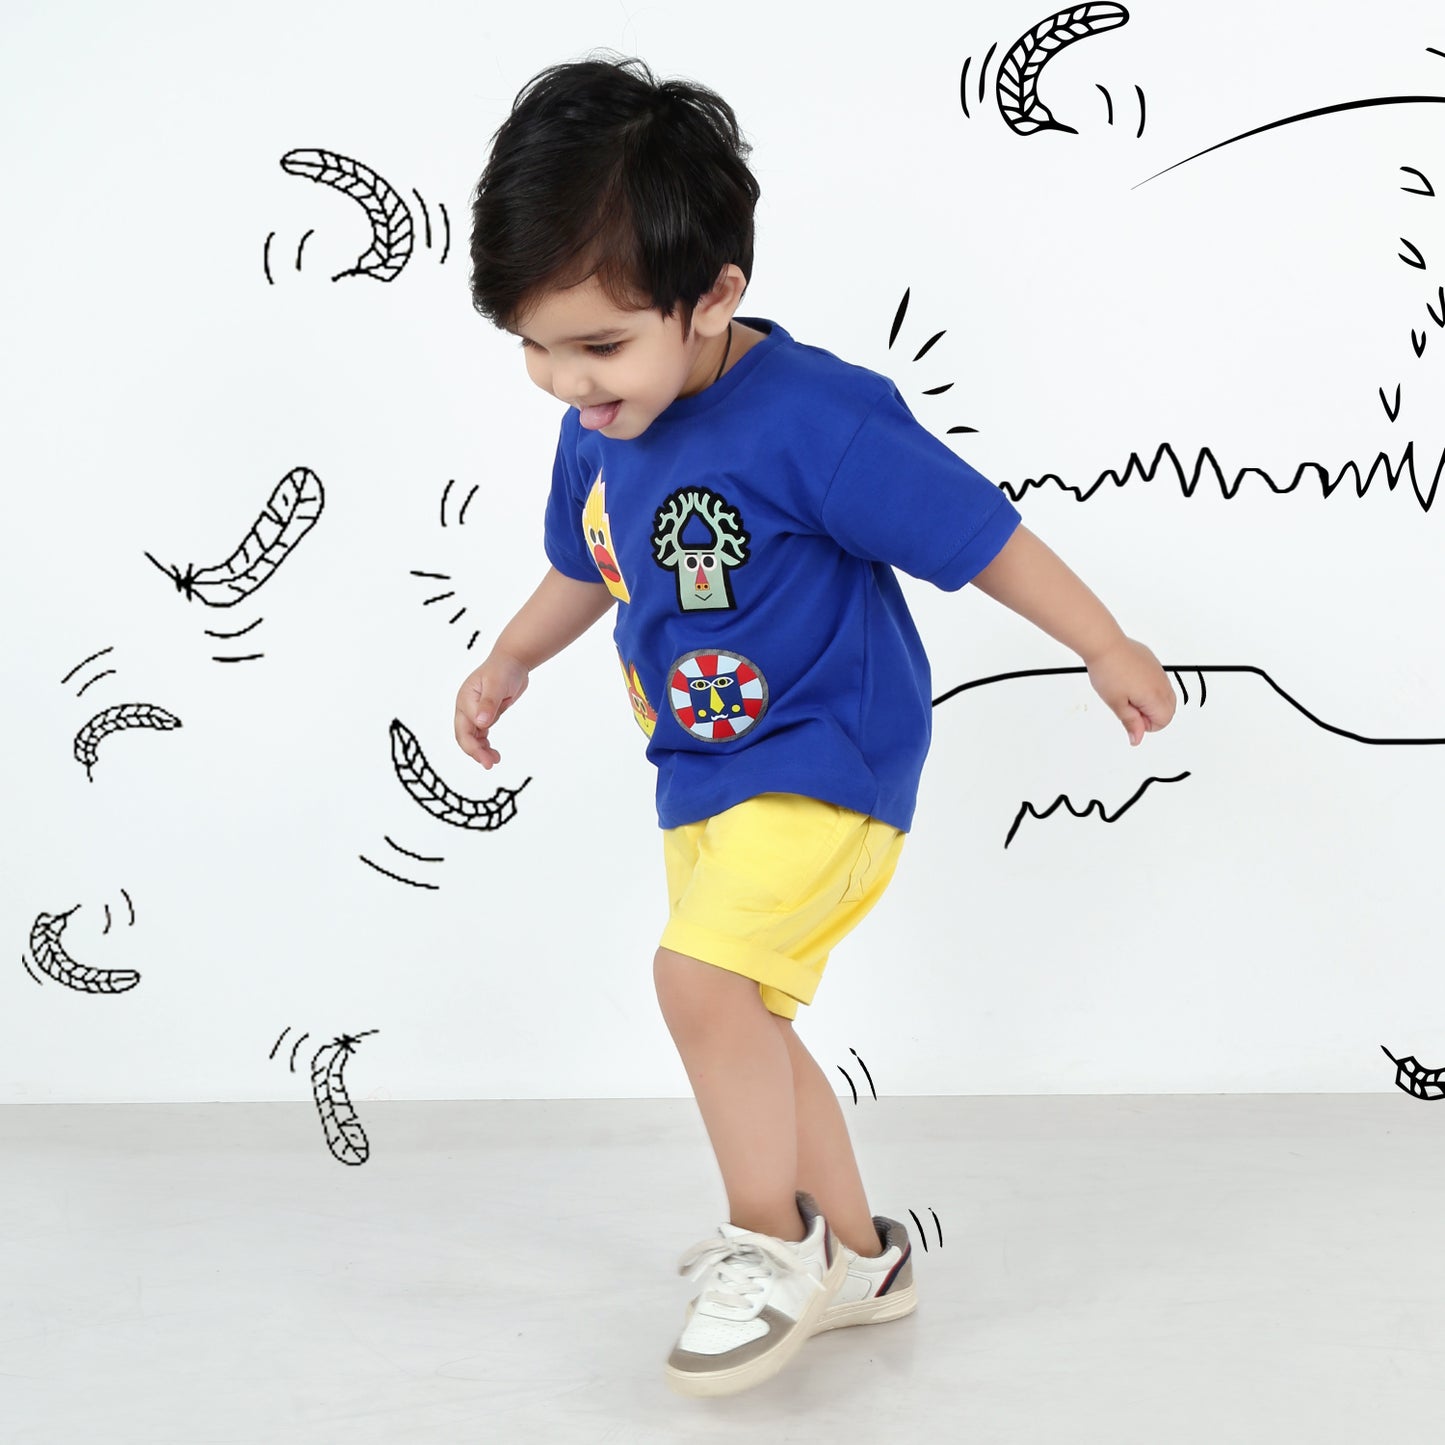 Get your little dude ready to play with our cartoon set!